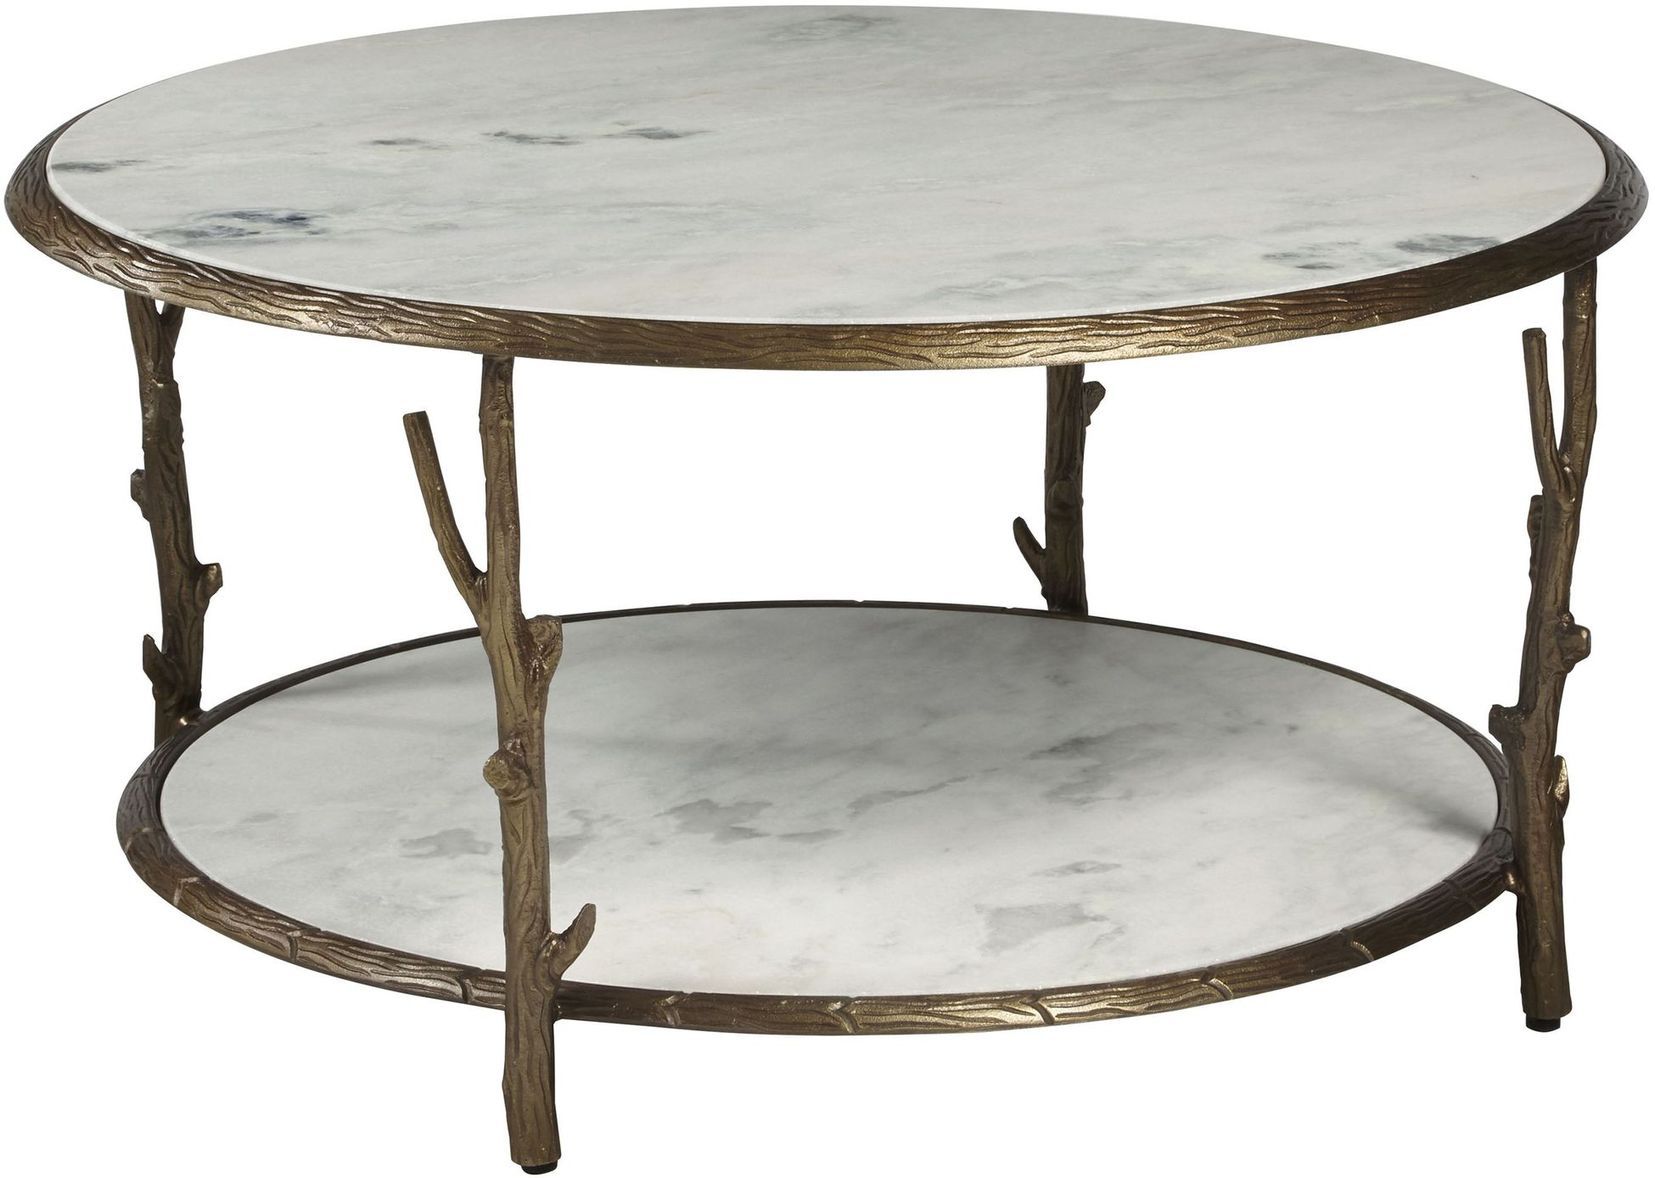 Antique Accents Marble Brady Cocktail Table 2 Piece Set Intended For Antique Cocktail Tables (View 10 of 15)